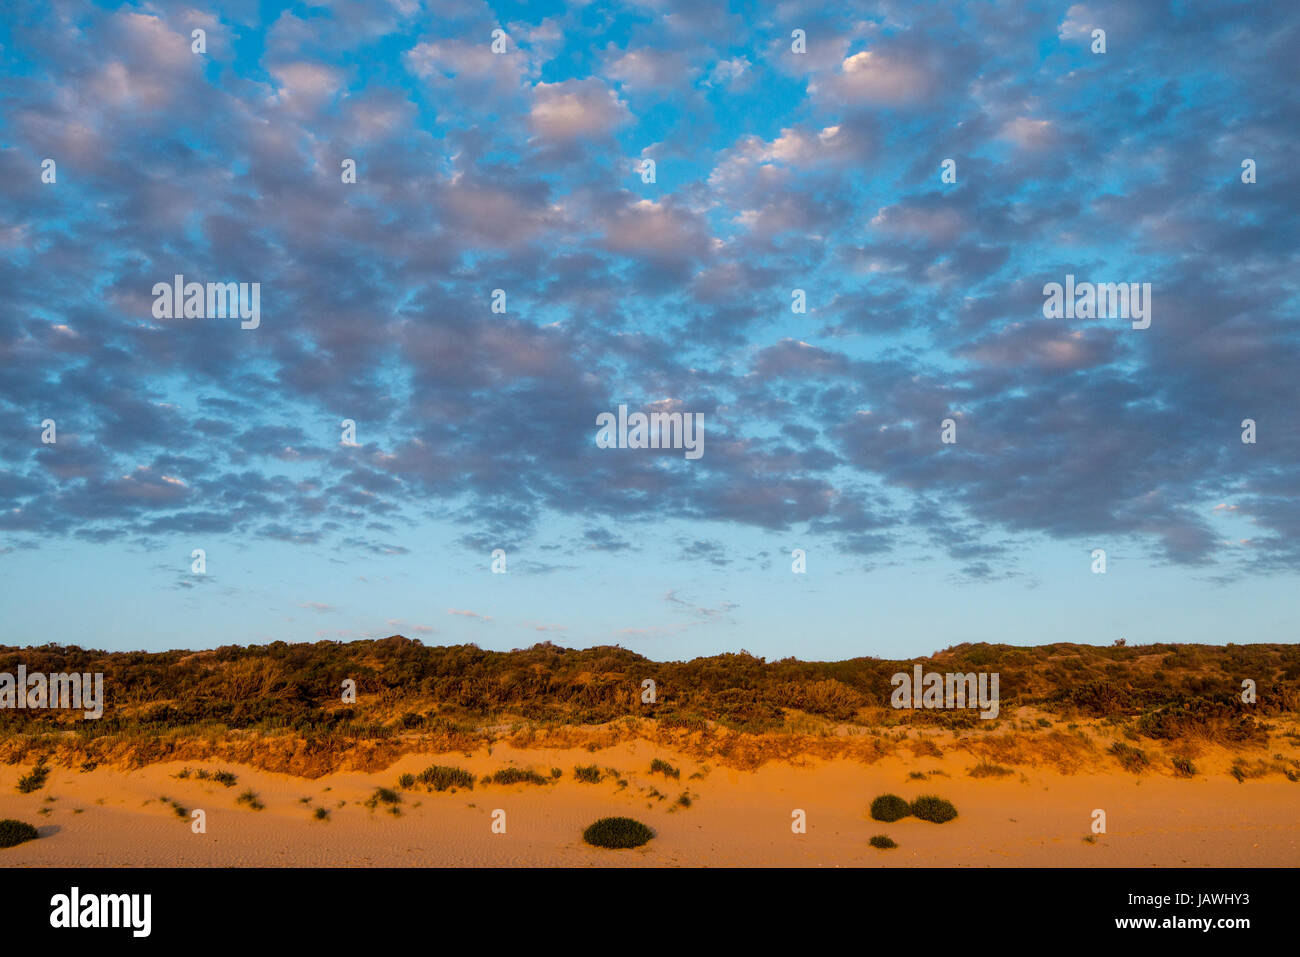 A cluster of clouds gather over a sand dune at sunset. Stock Photo